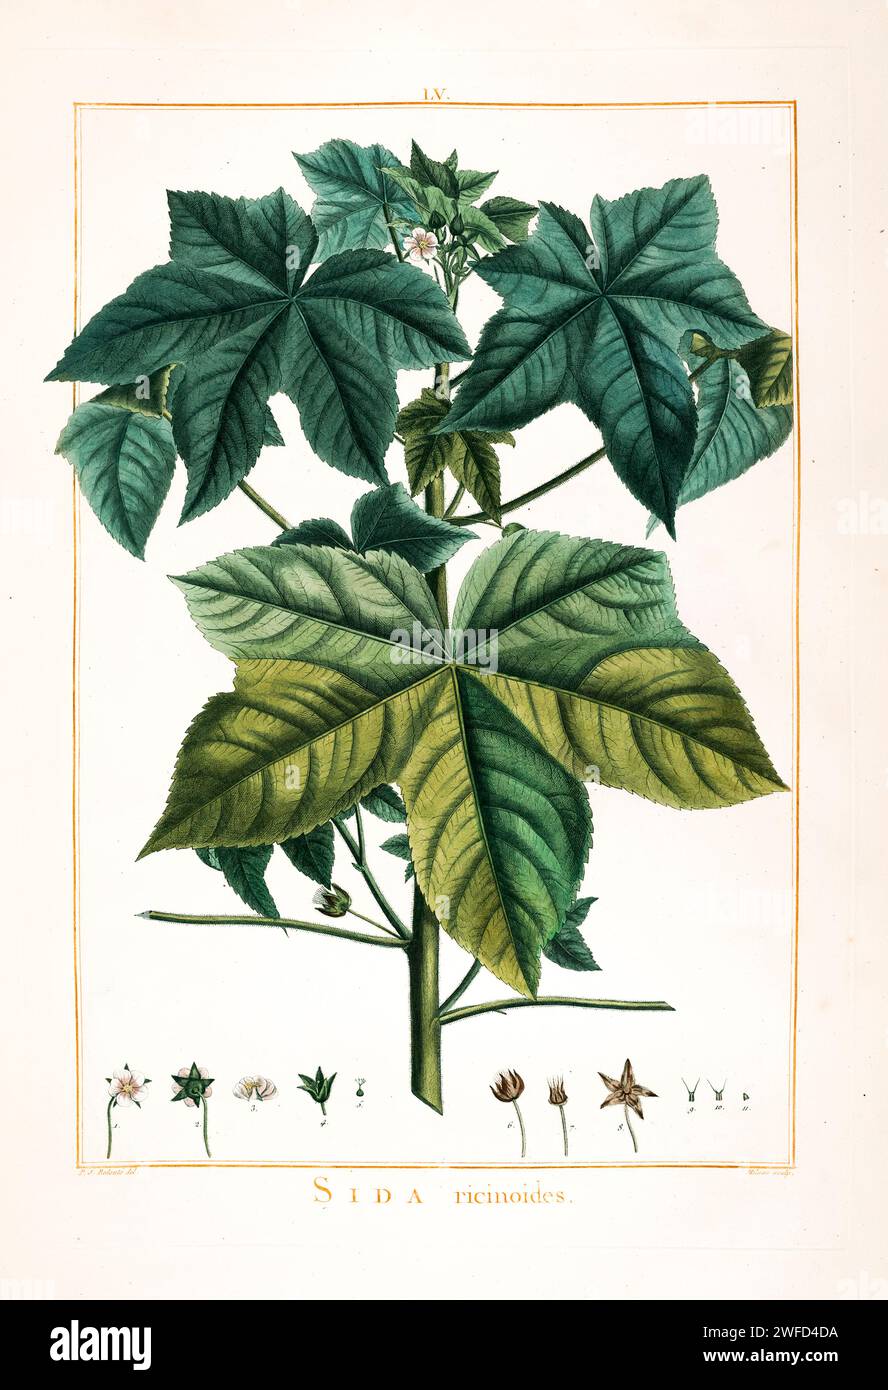 Sida ricinoides syn Sida palmata Hand Painted by Pierre-Joseph Redouté and published in Stirpes Novae aut Minus Cognitae (1784) by Charles Louis L'Héritier de Brutelle. Stock Photo